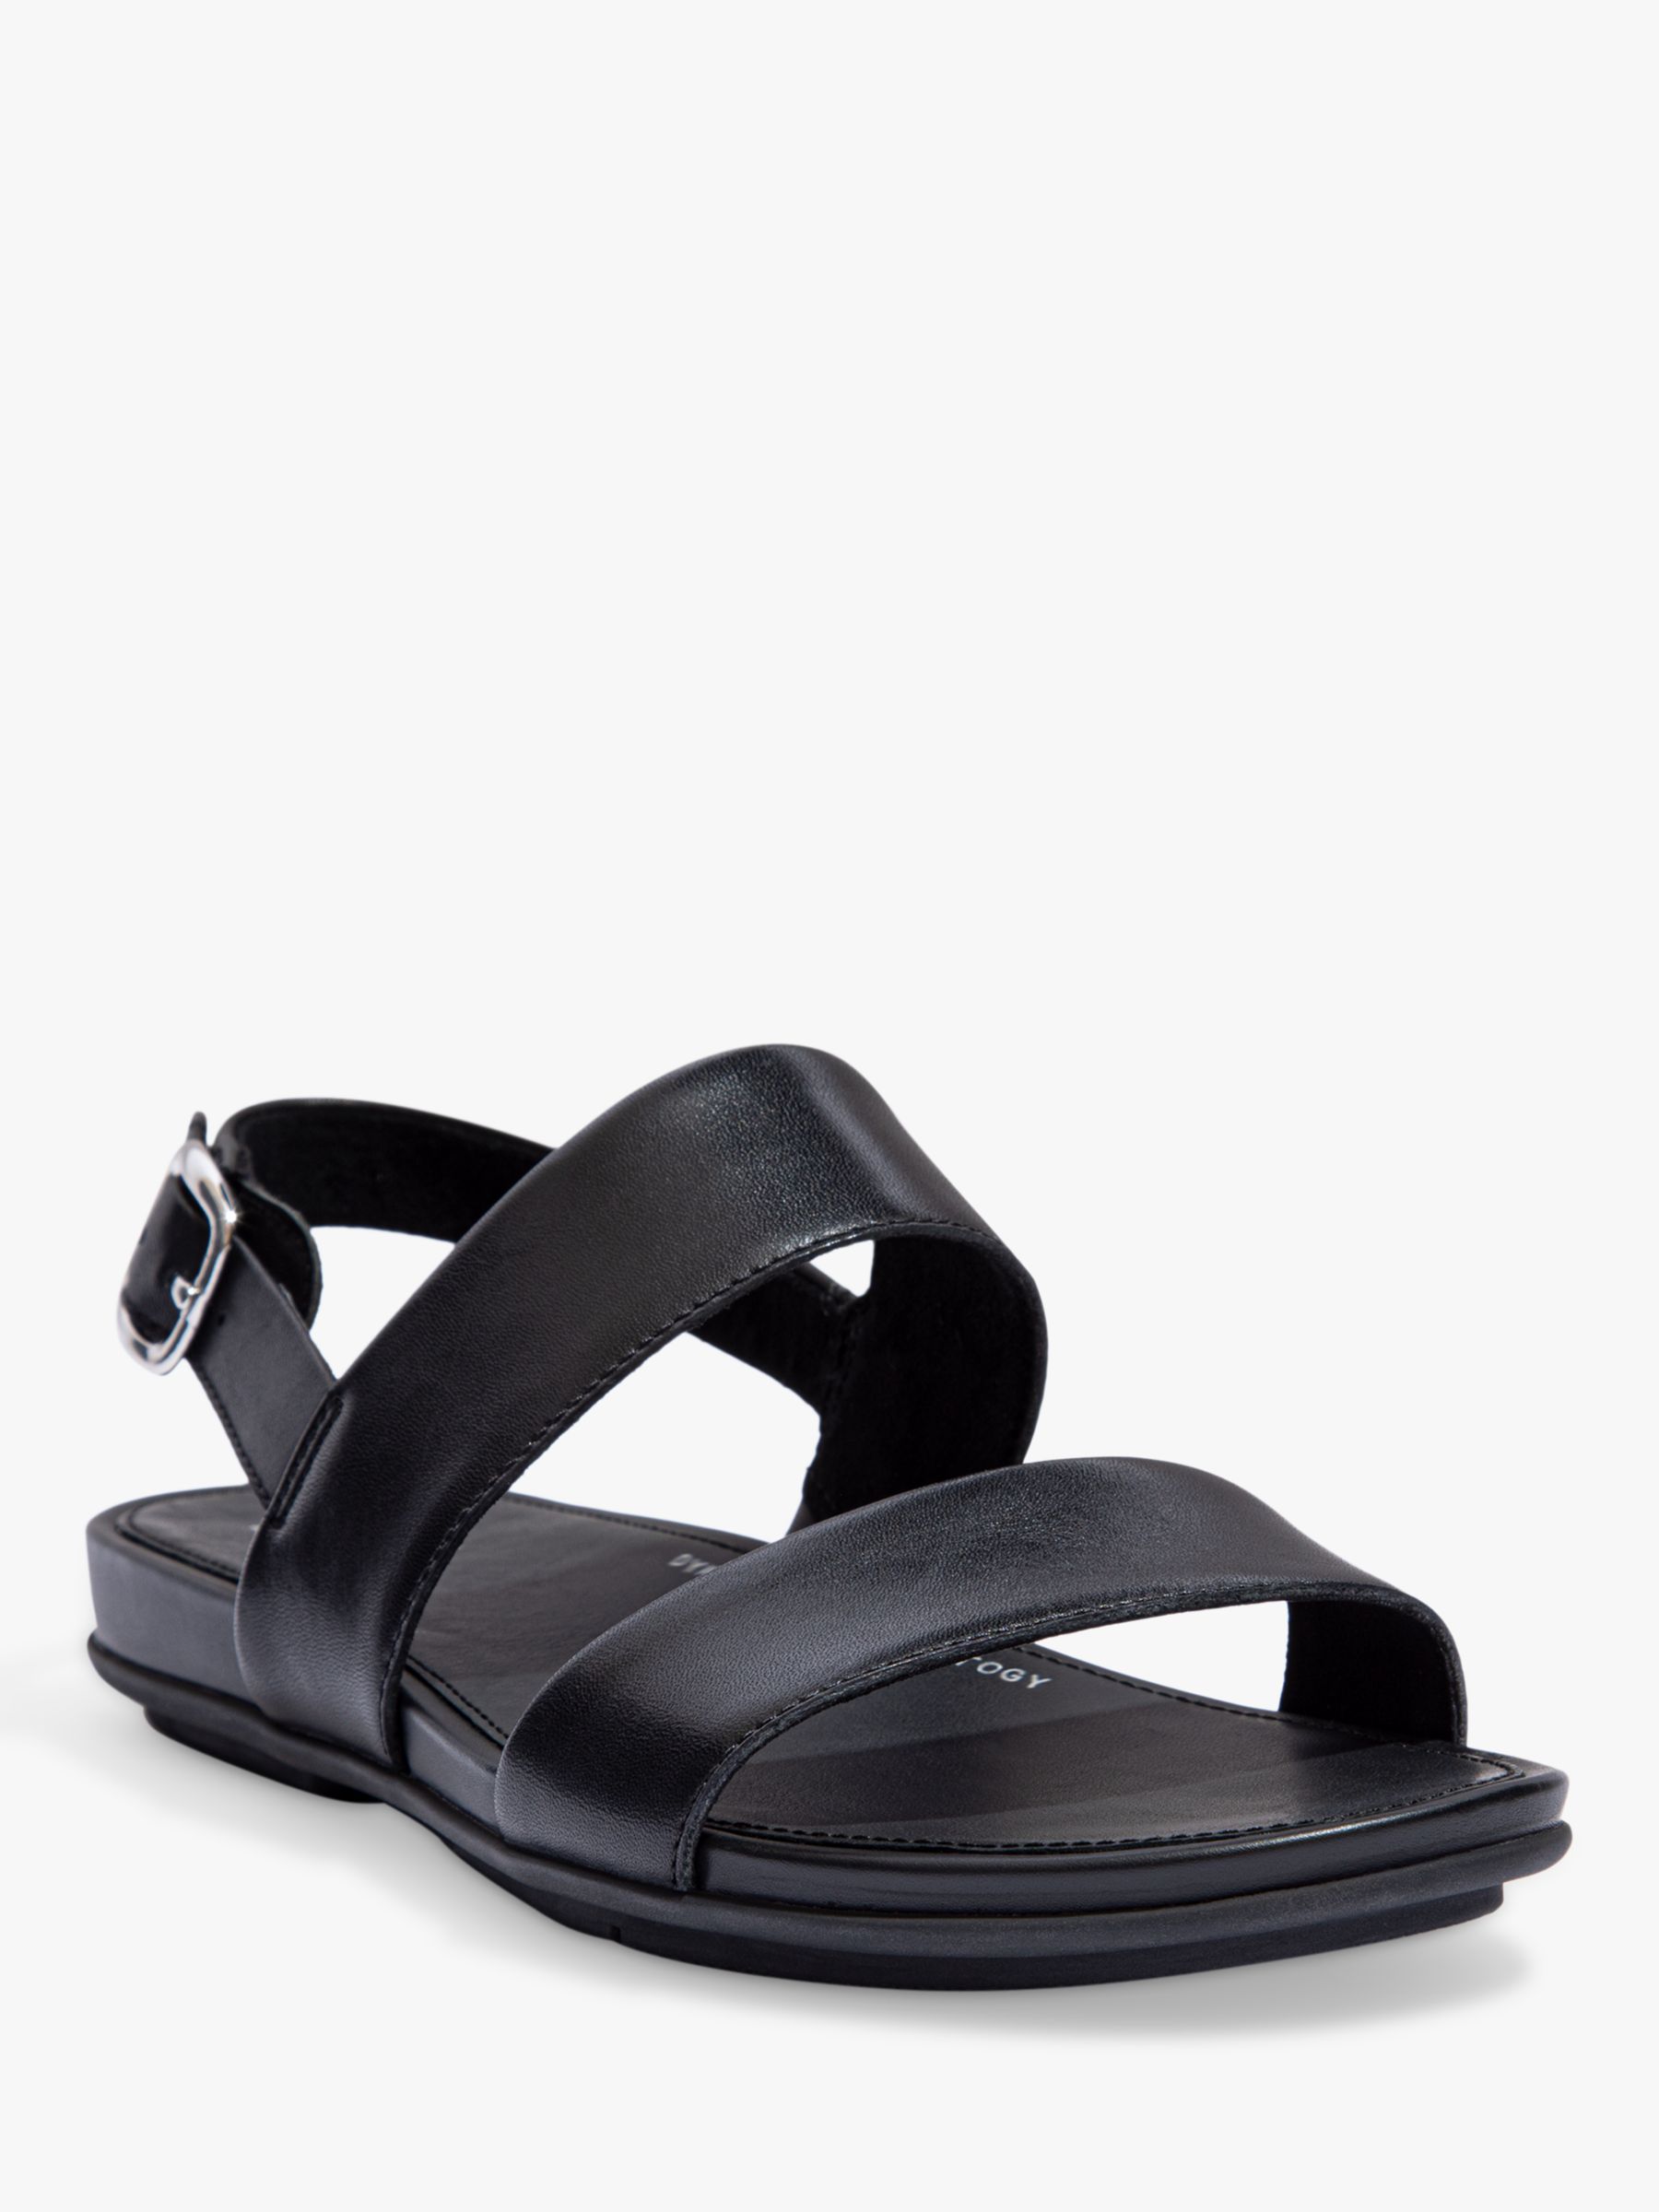 FitFlop Gracie Leather Double Strap Sandals, All Black, 3